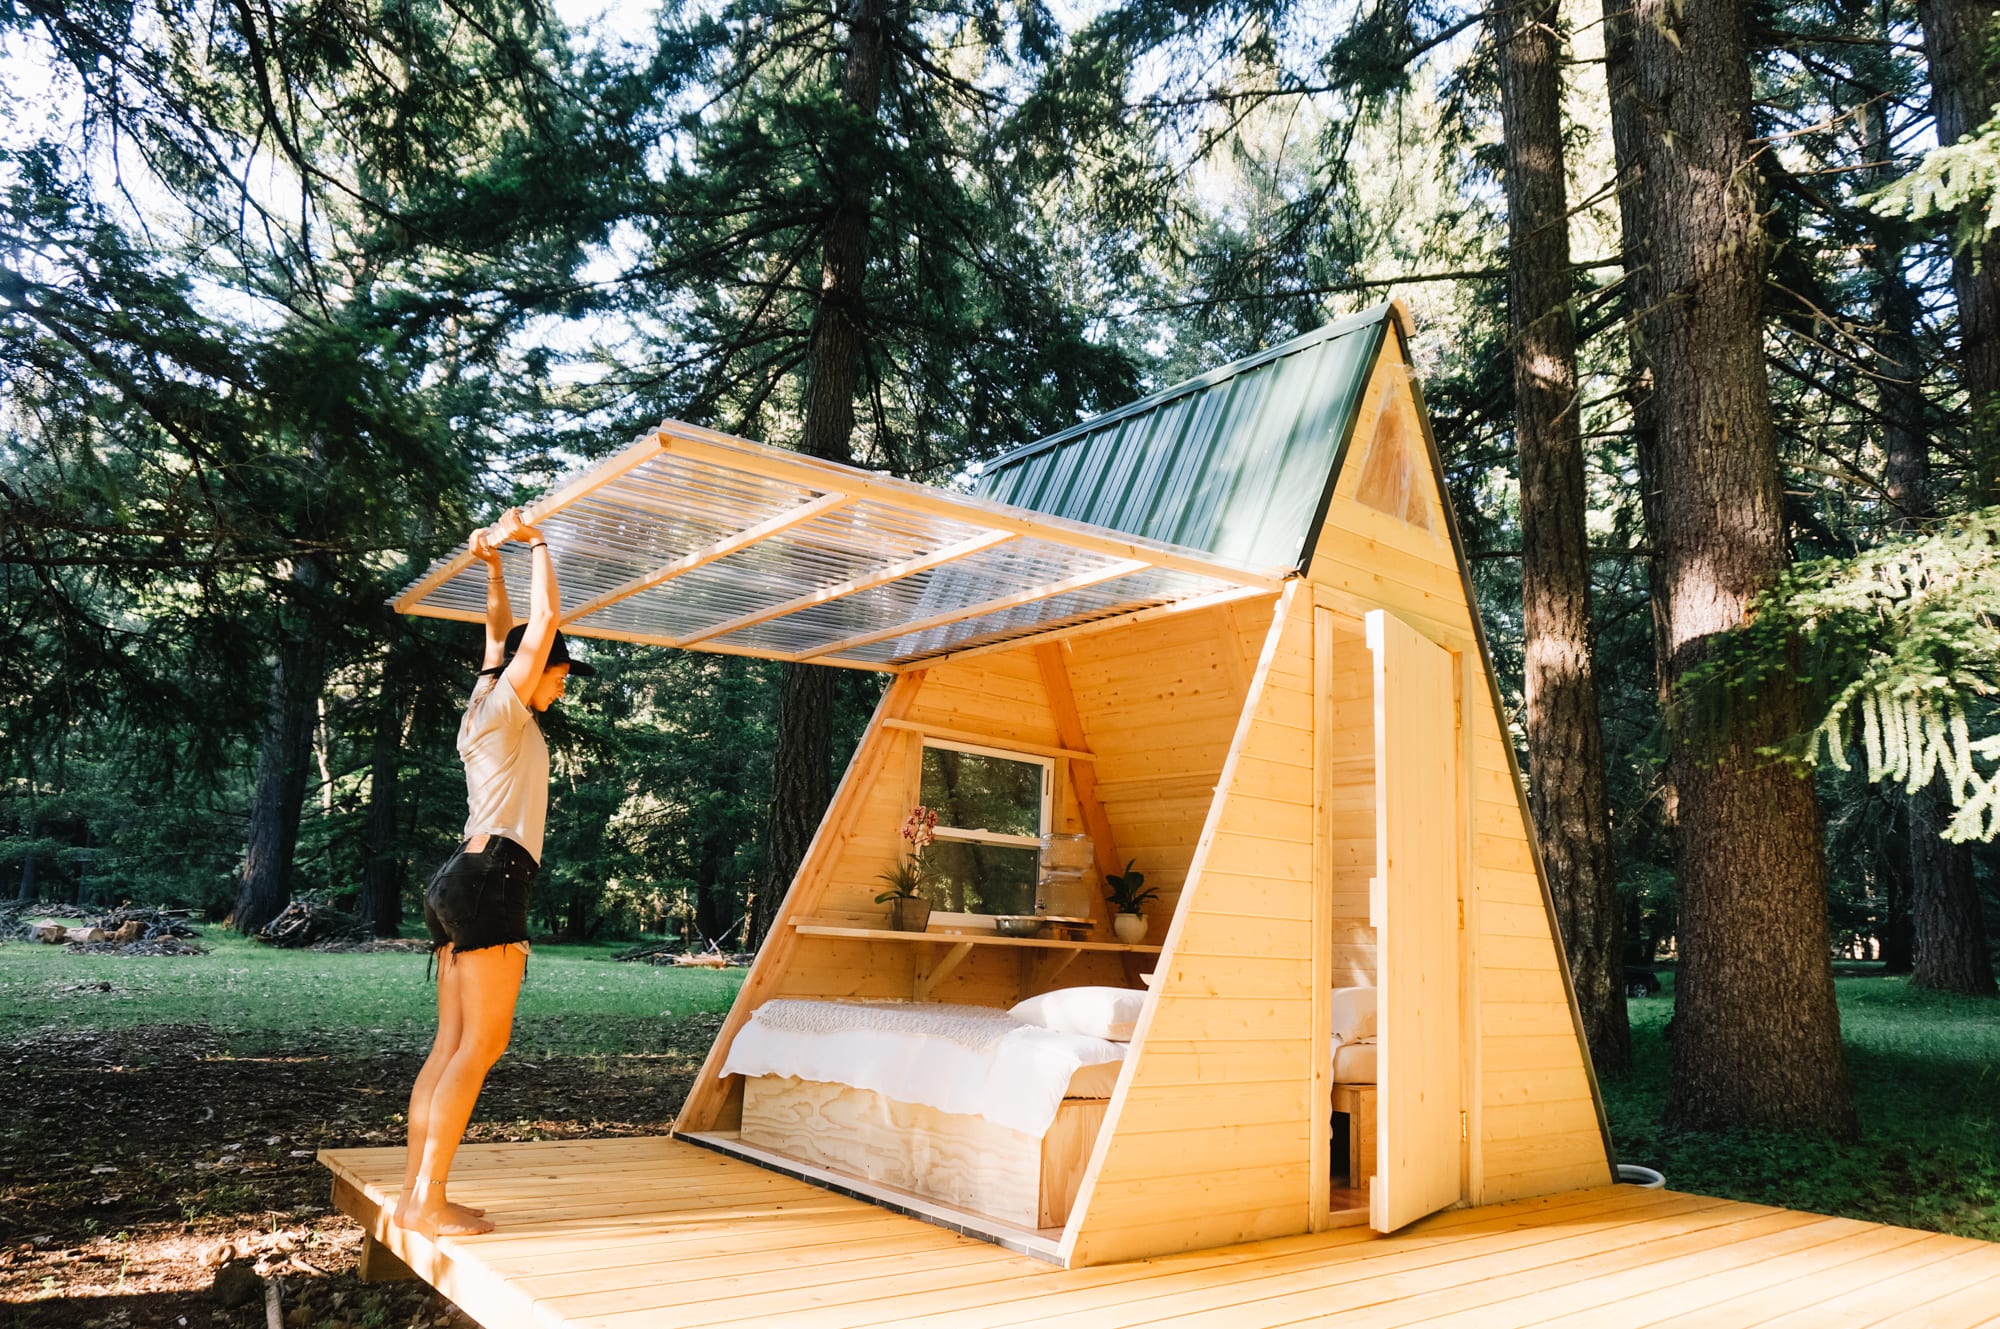 How To Build This A-Frame Cabin That Will Pay For Itself - Hipcamp Journal